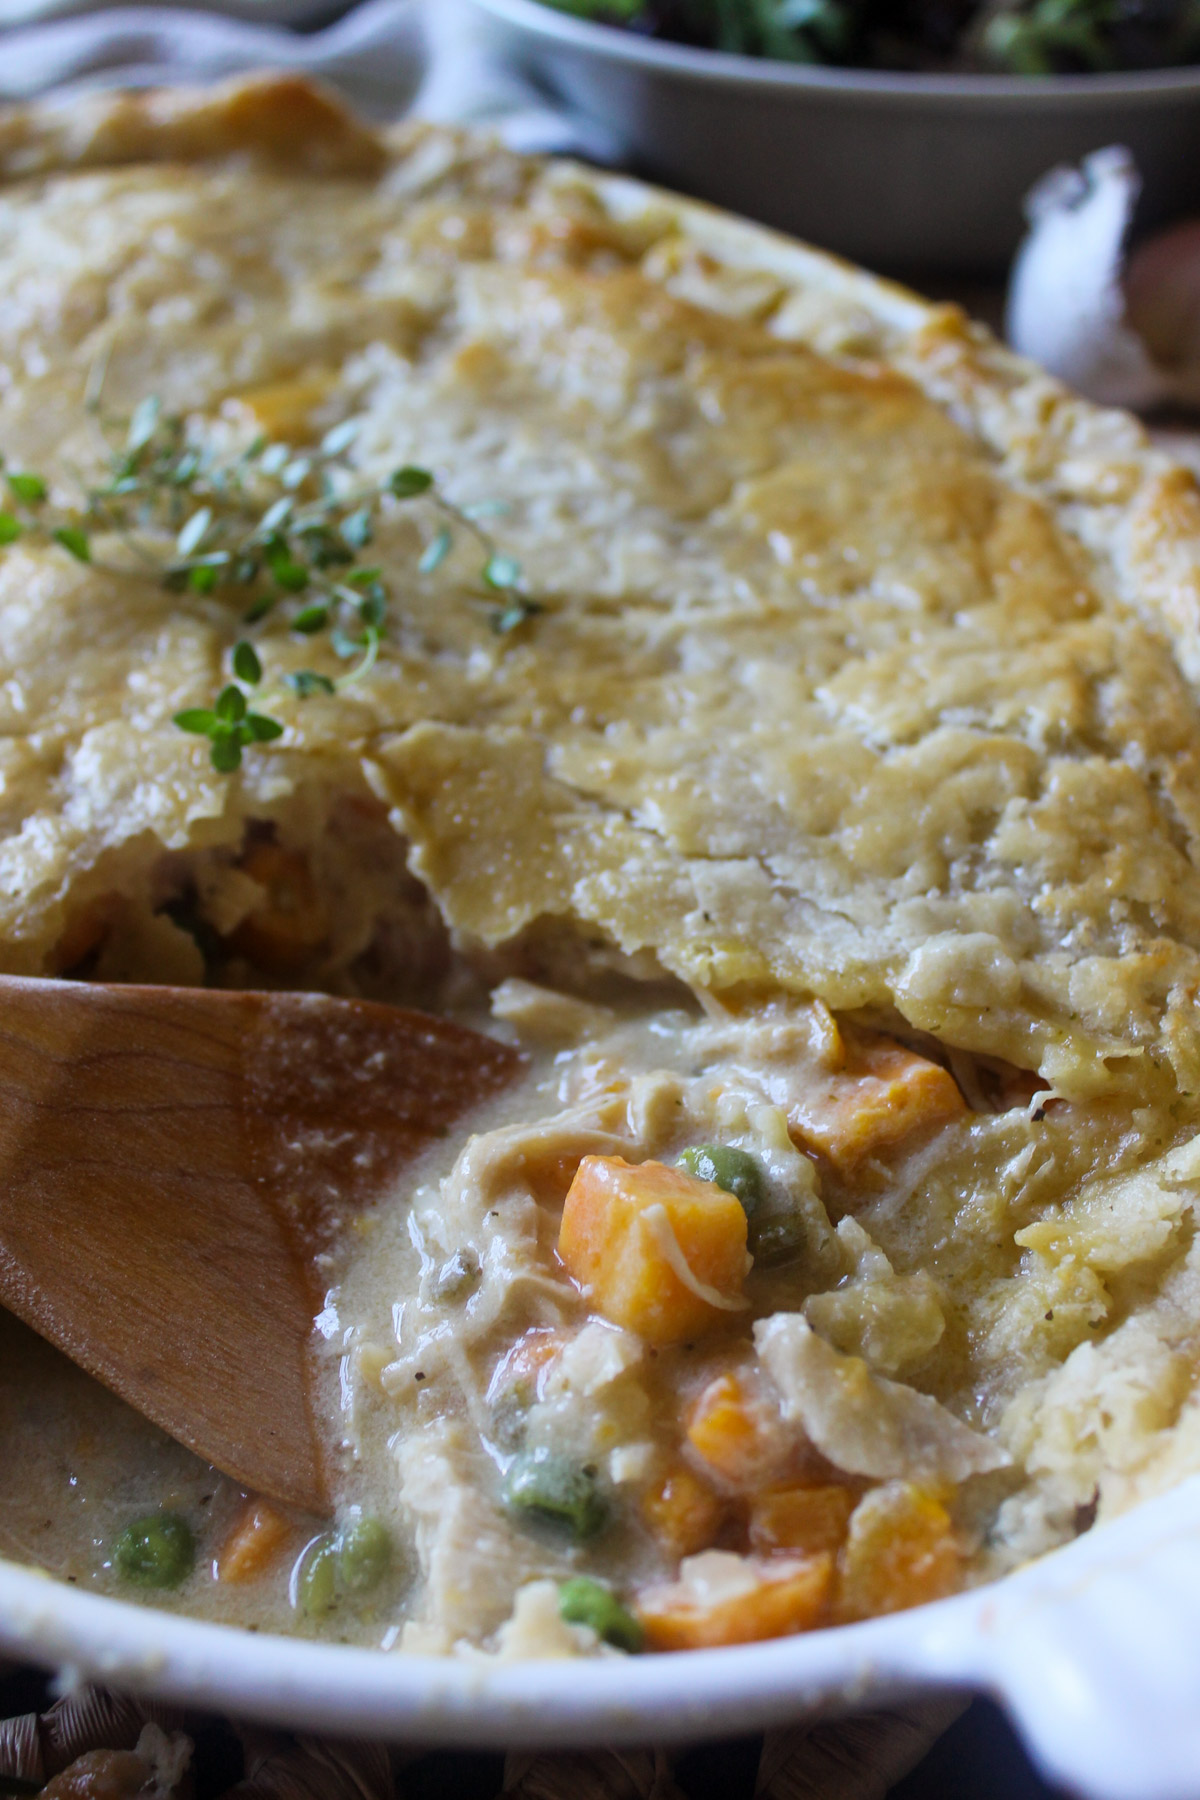 Chicken pot pie broken into with a wooden spoon showing the filling.